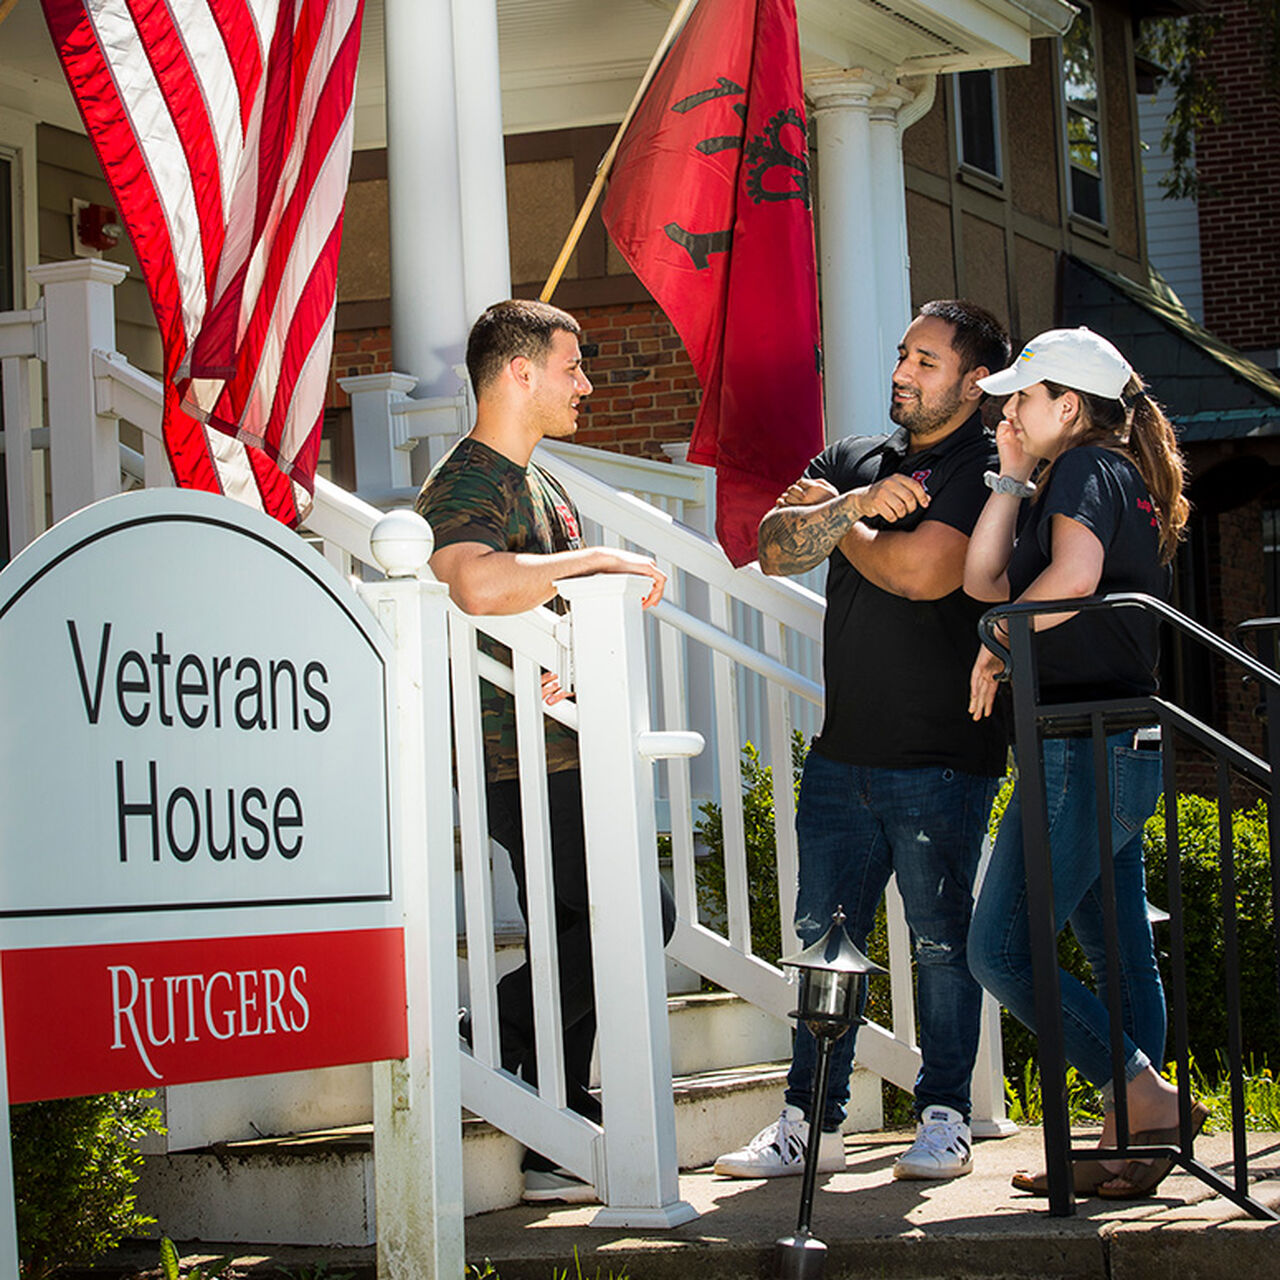 Students talking outside Veteran's House at Rutgers image number 0